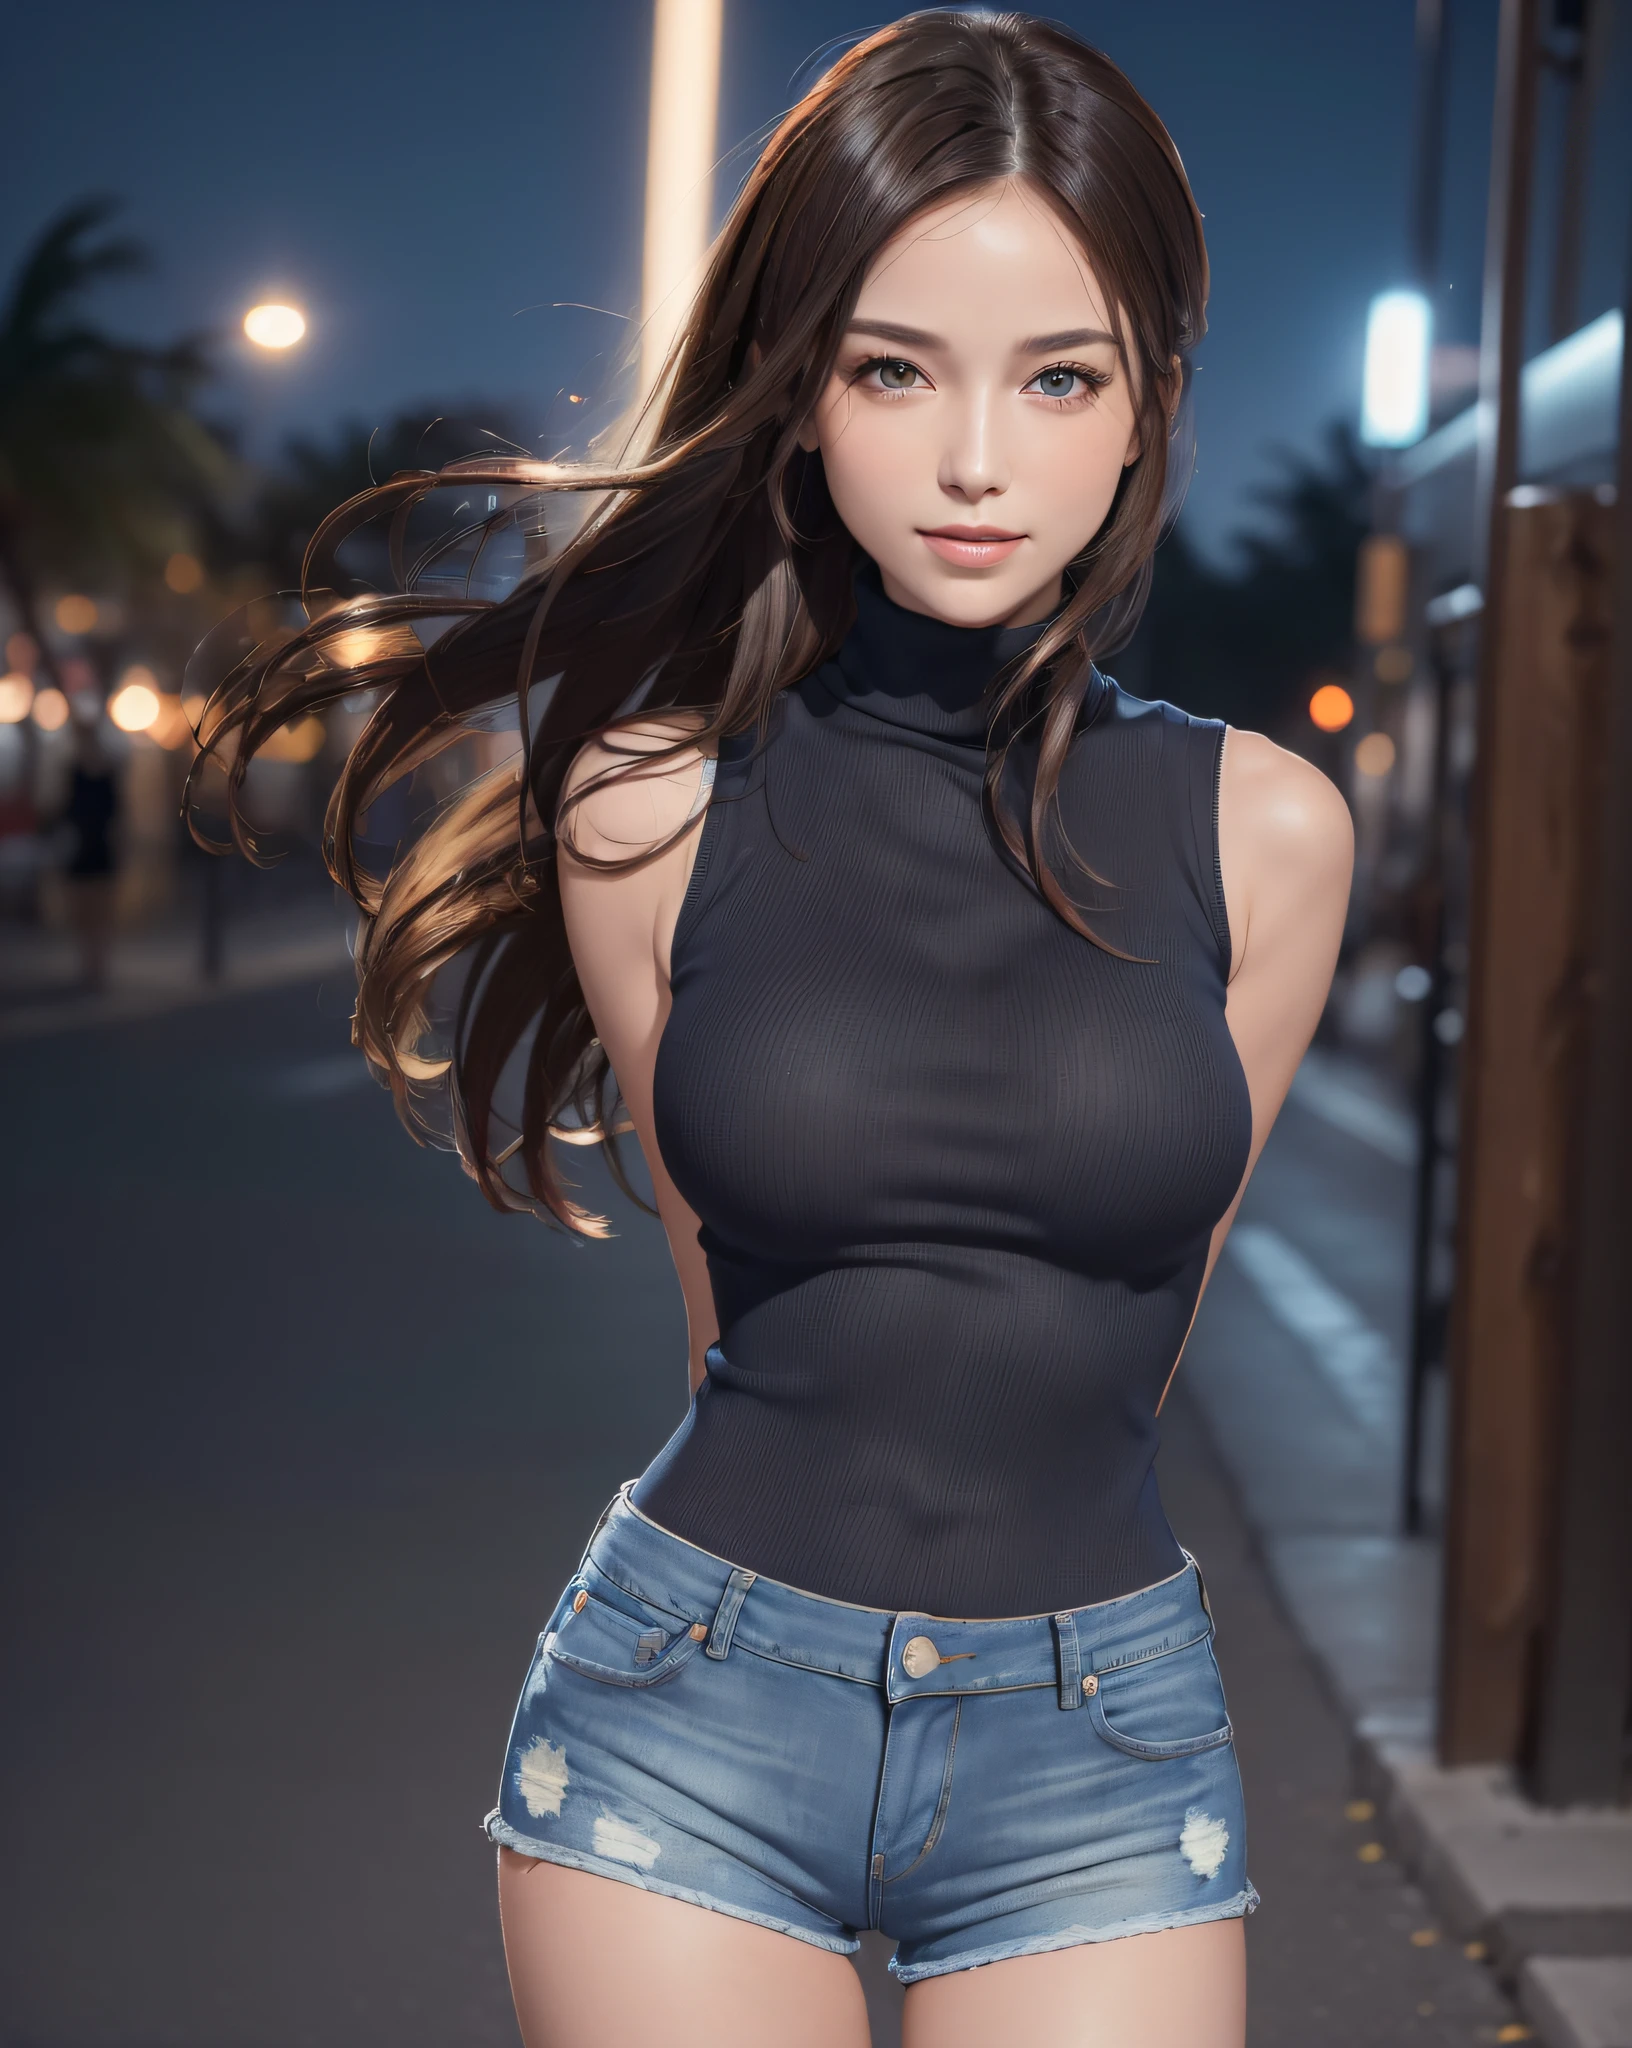 (1girl:1.3, solo), (Masterpiece, best quality, photorealistic, highres, photography, :1.3), ultra-detailed, sharp focus, professional photo, commercial photo, (face focus:1.3), (upper body:1.3, bust-up portrait:1.3), BREAK, 1 brunette girl, solo, European girl, hot model, highly detailed eyes and pupils, realistic skin, (attractive body, medium-large breast:1.15), extremely detailed hair, delicate sexy face, sensual gaze, shiny lips, BREAK, ((wearing a orange sleeveless turtleneck sweateri:1.3, denim shorts:1.3)), (night time:1.5, outdoor, at night beach street, blue ocean, blurry background, simple background, no human background:1.25, no-trees background:1.25), (standing, attractive posing, arms up, arms behind up on head, armpit focus), ((realistic, super realistic, realism, realistic detail)), perfect anatomy, perfect proportion, bokeh, depth of field, hyper sharp image, (attractive emotion, seductive smile, :d, ;p),